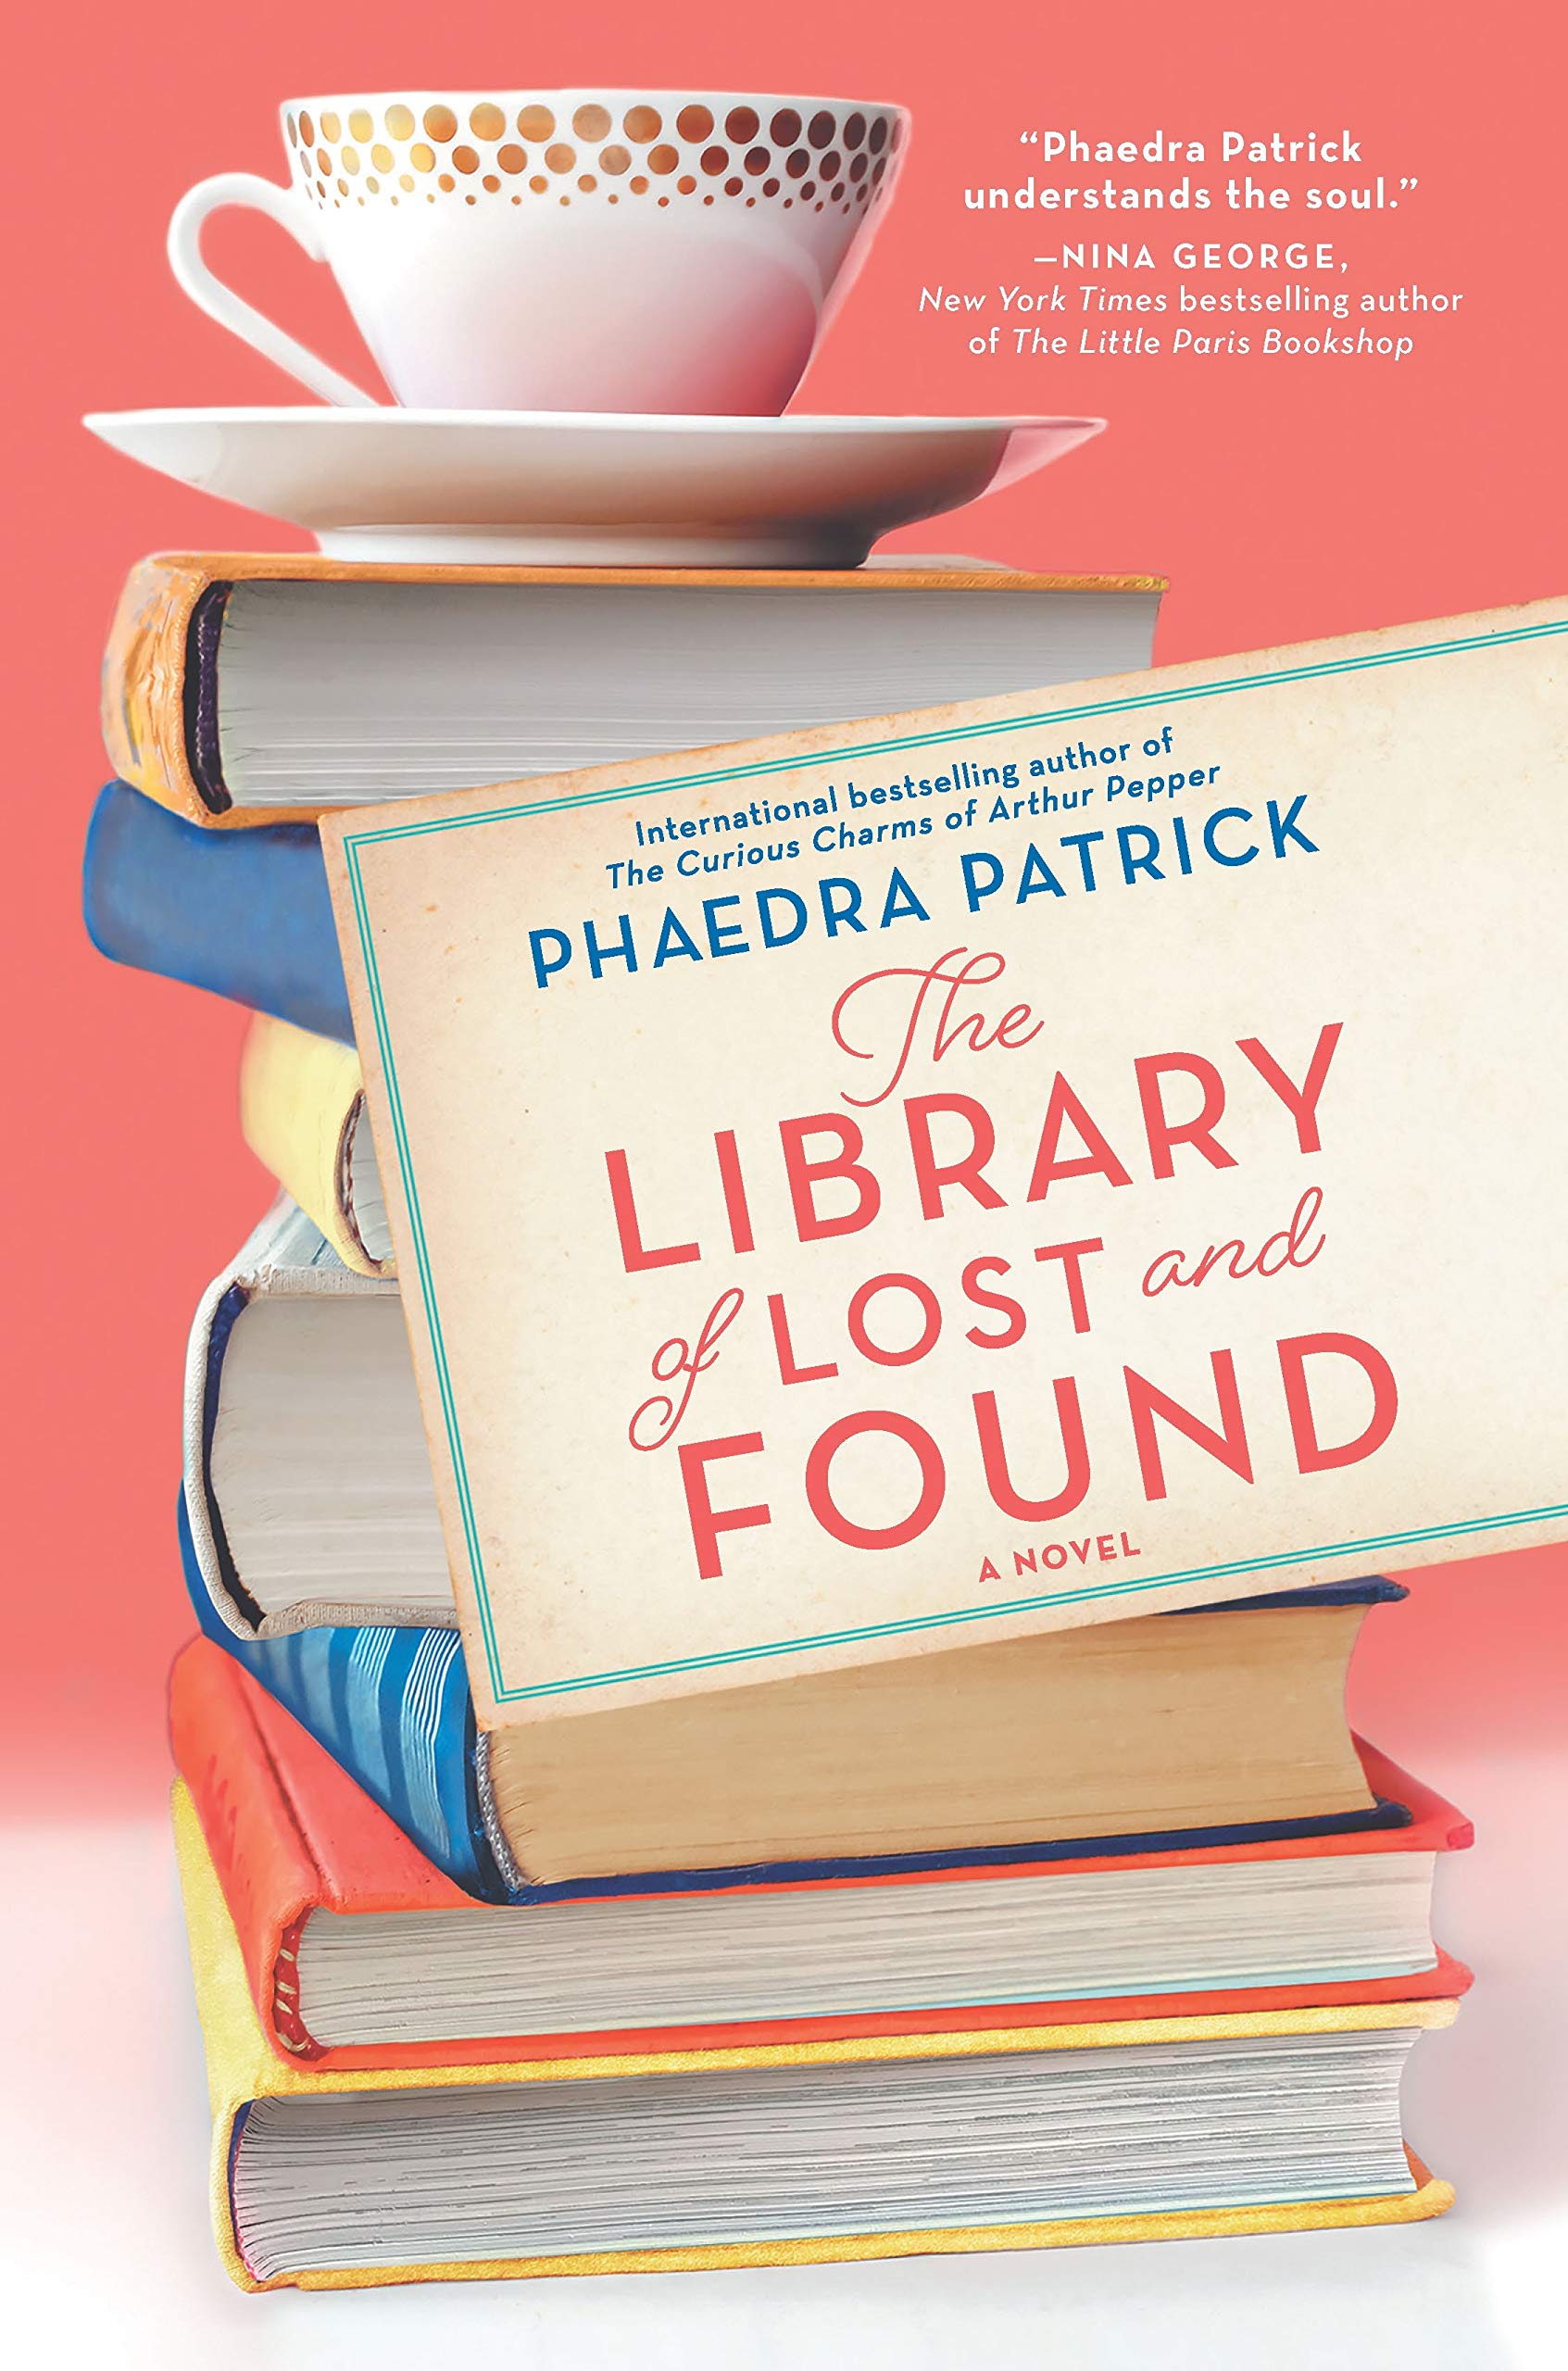 Cover of The Library of Lost and Found by Phaedra Patrick